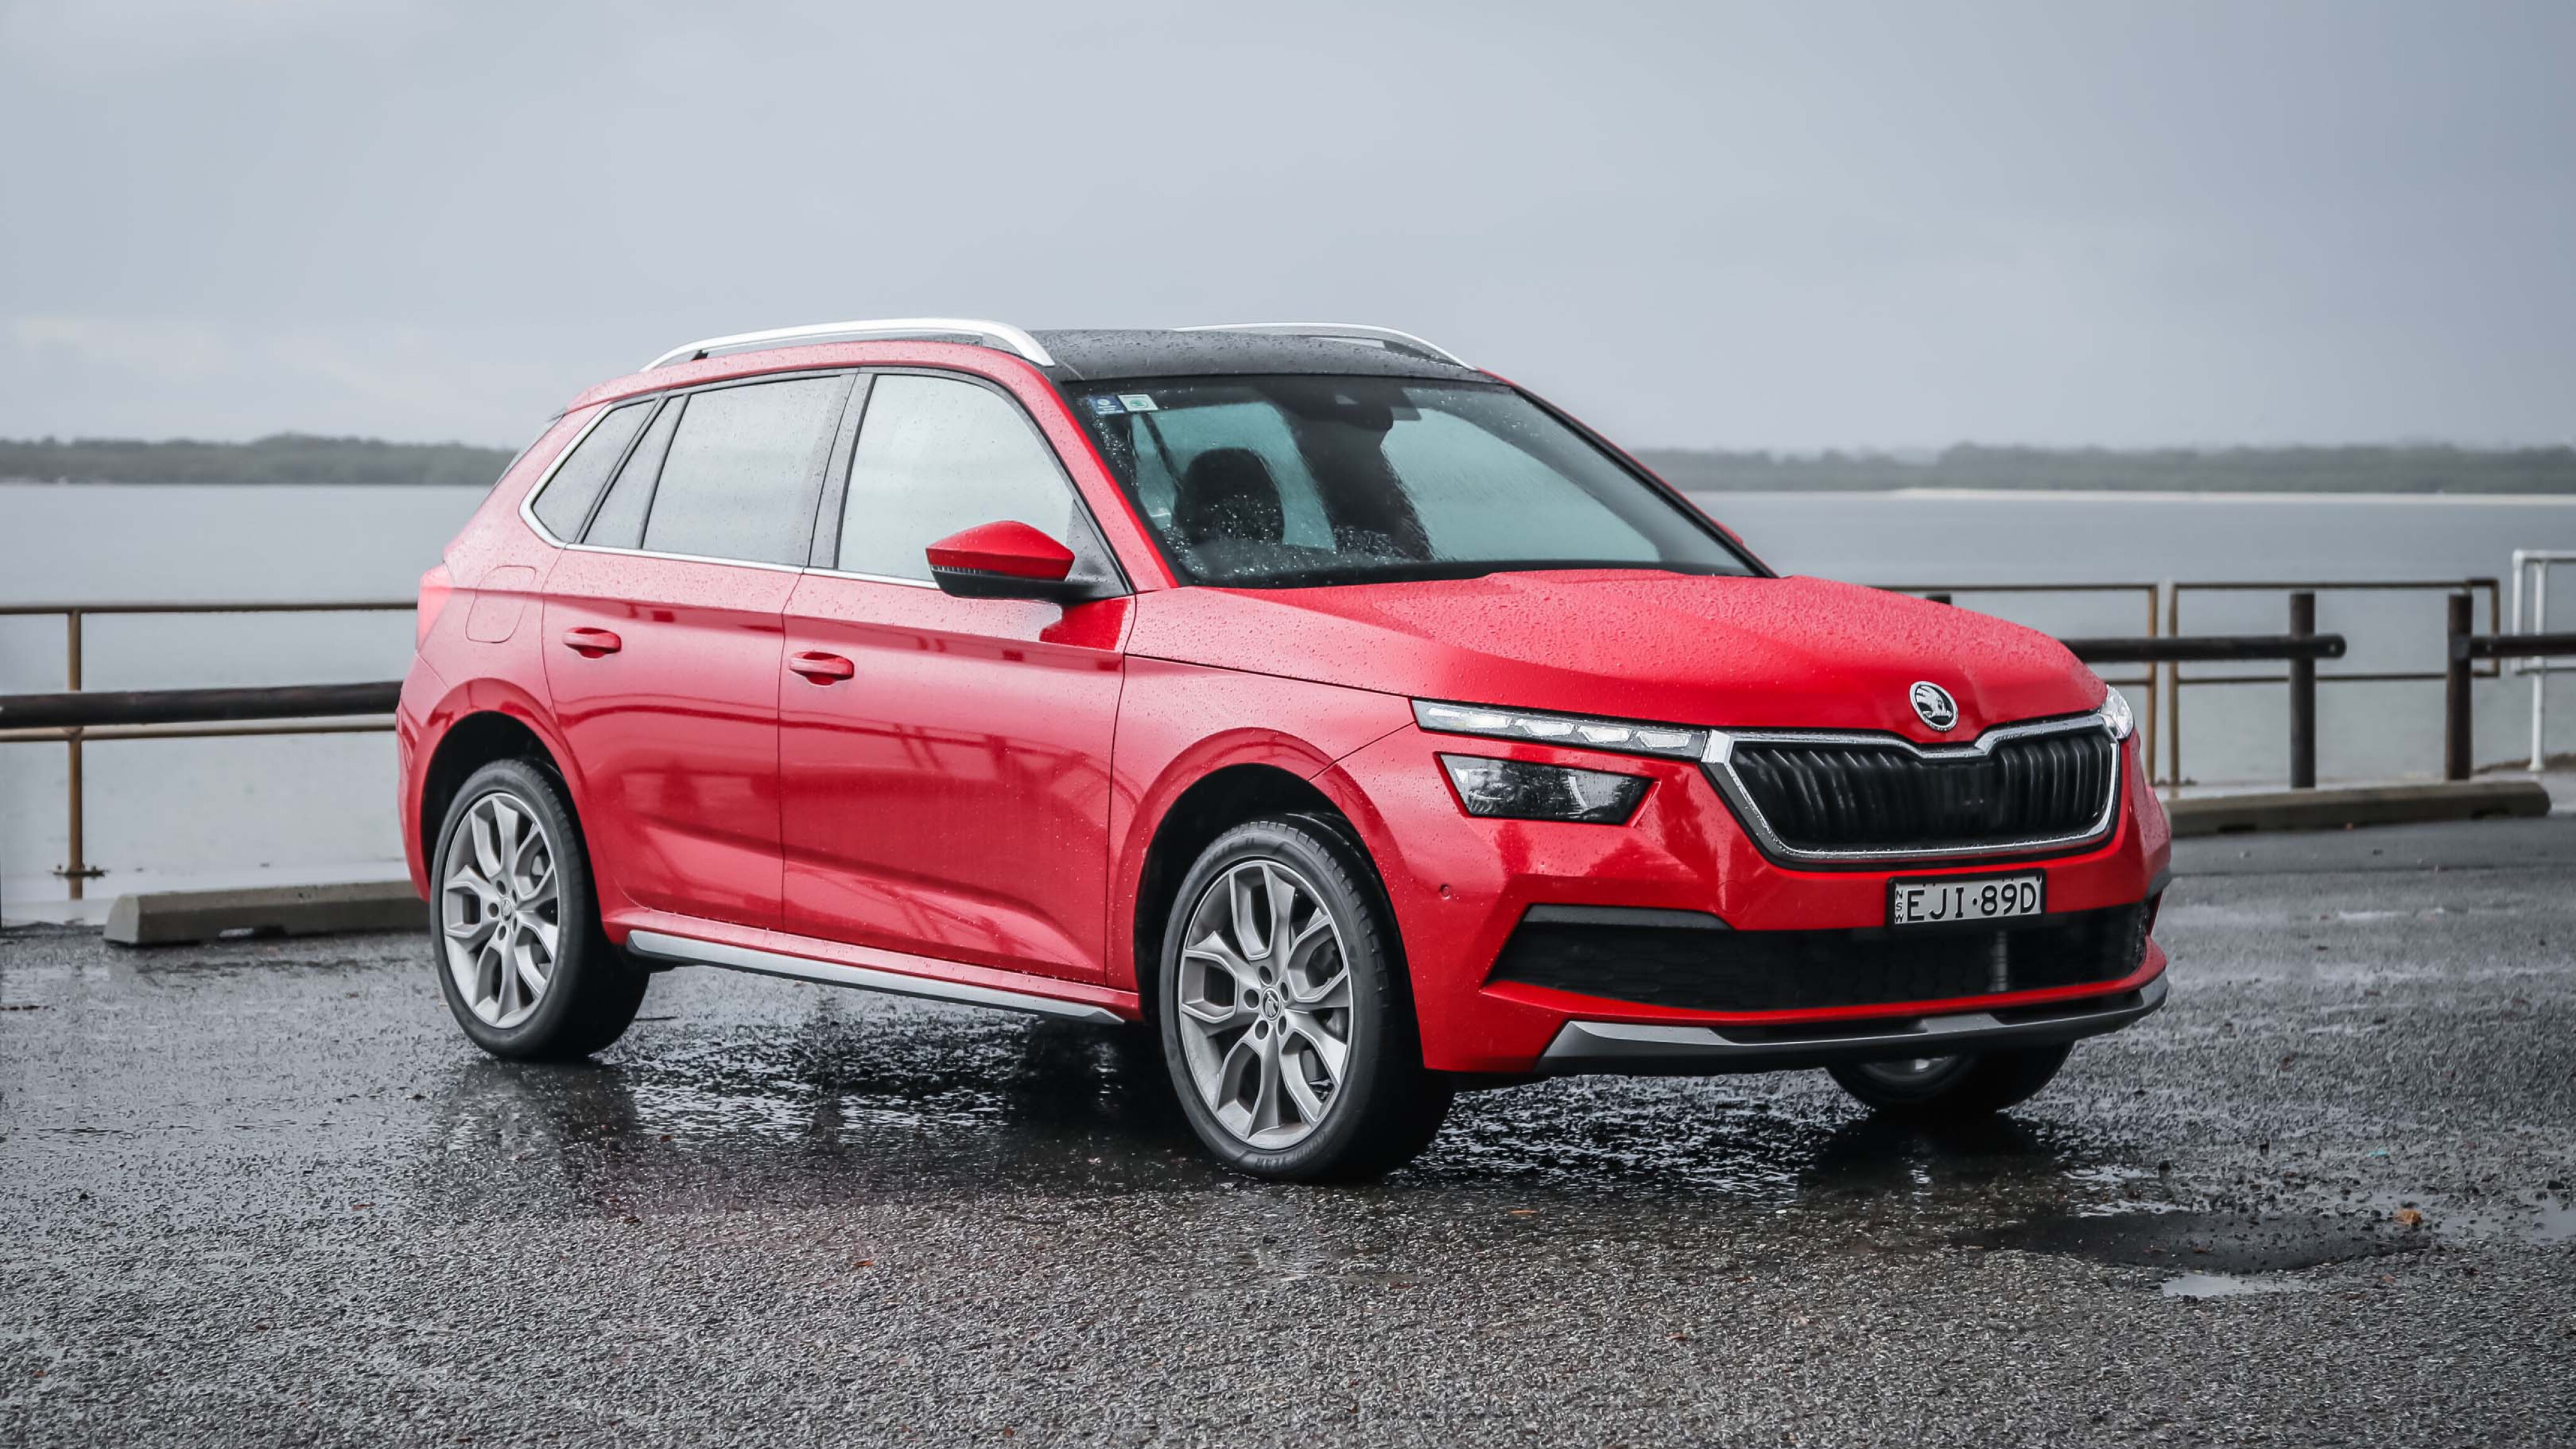 2023 Skoda Kamiq pricing and features: Run-Out variant added with